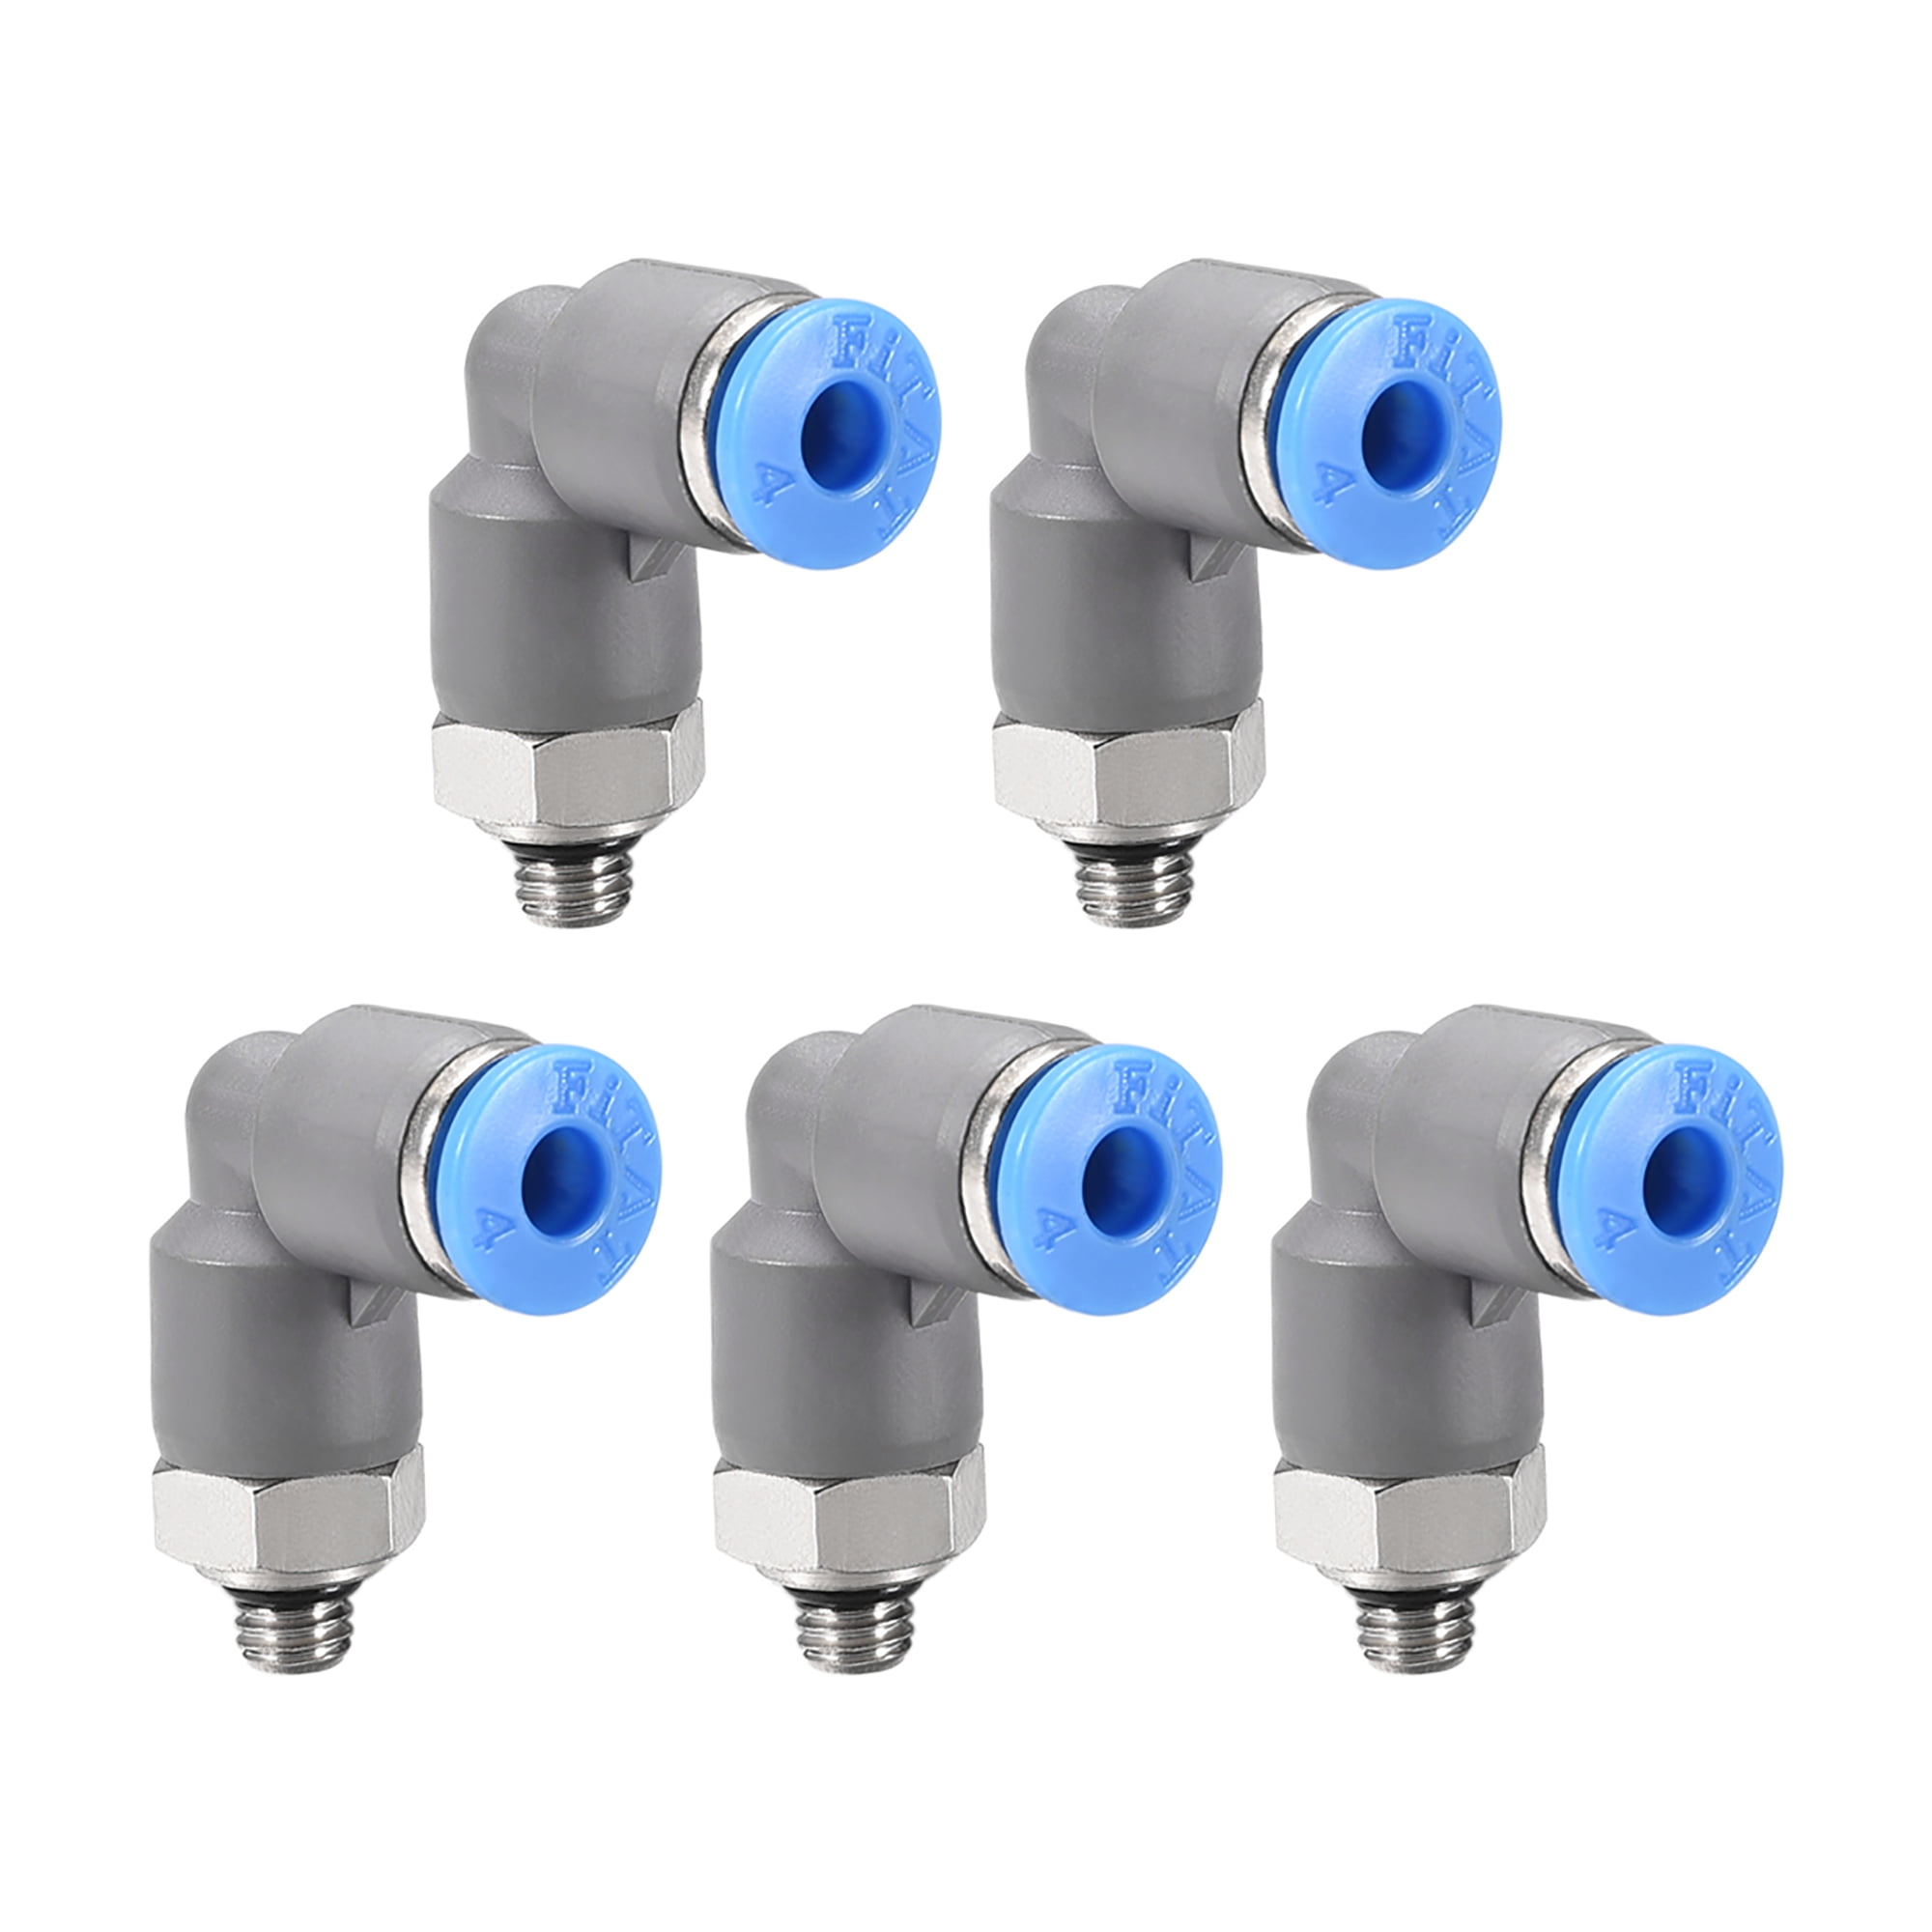 5PCS Pneumatic Push in Connector 3/8" OD Tube x 1/4" Male NPT 90 Degree Elbow 